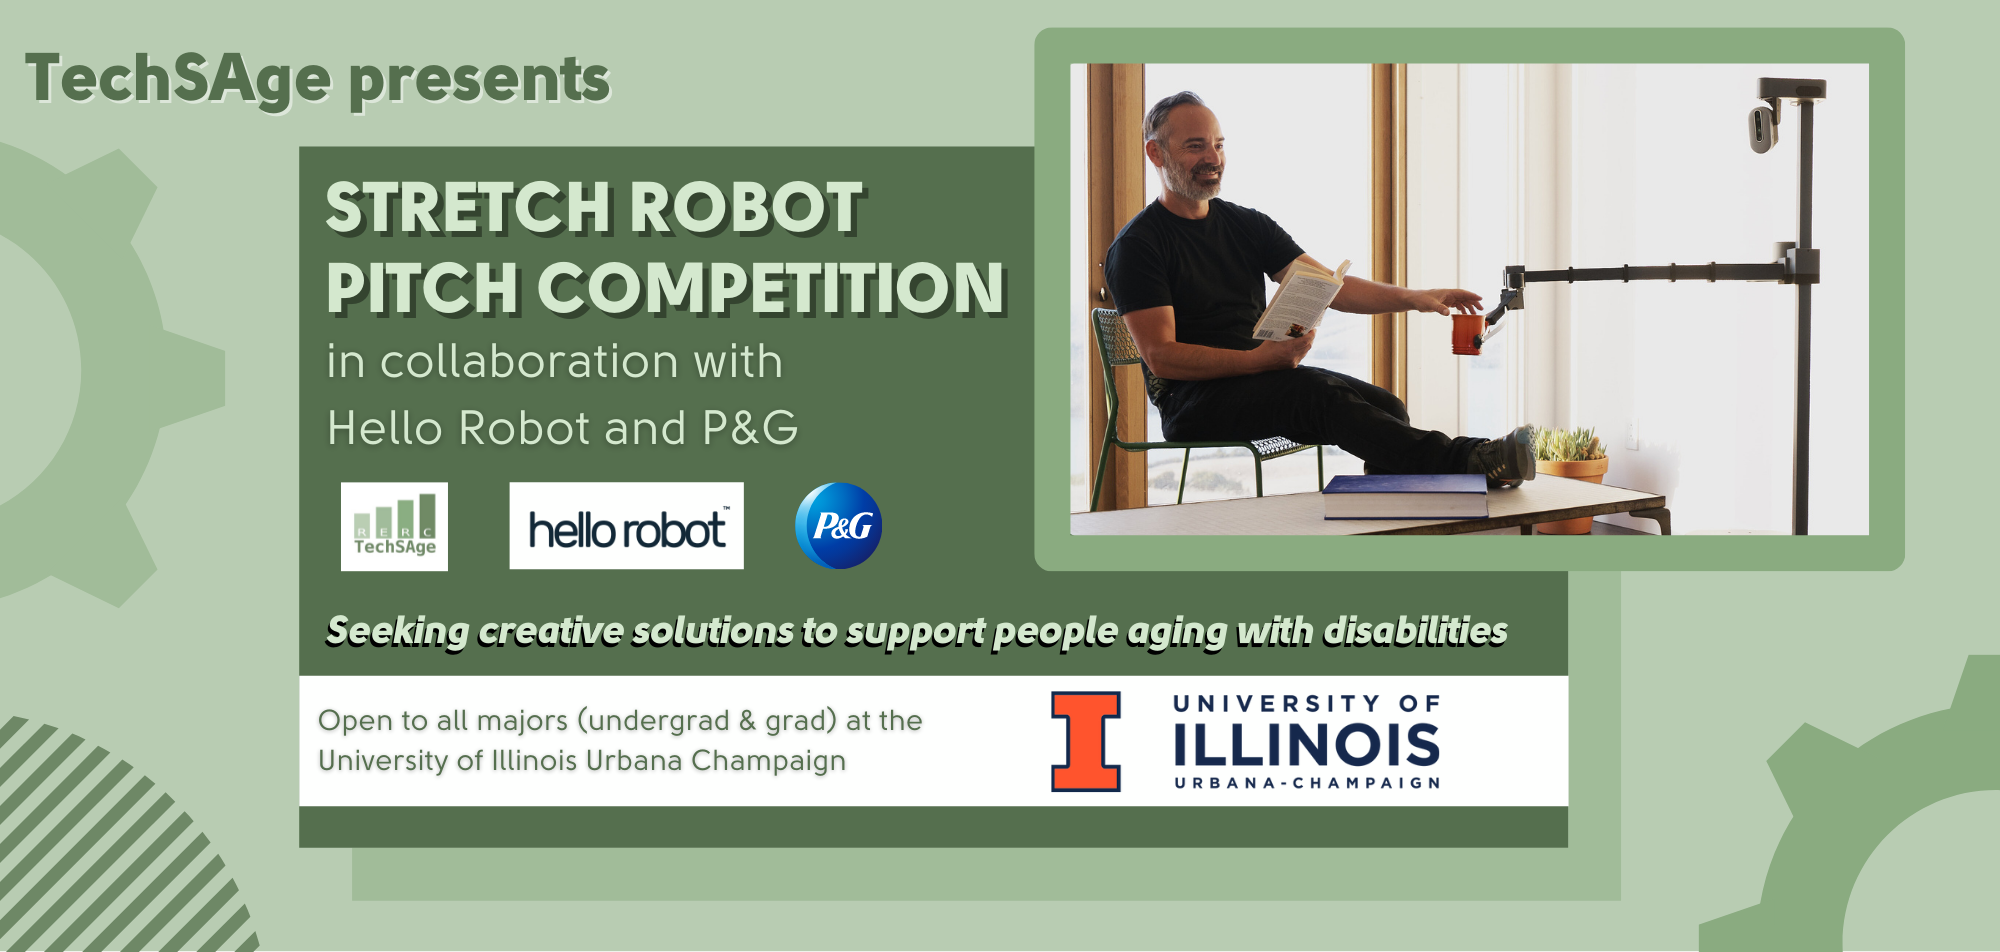 Stretch Robot Pitch Competition promo